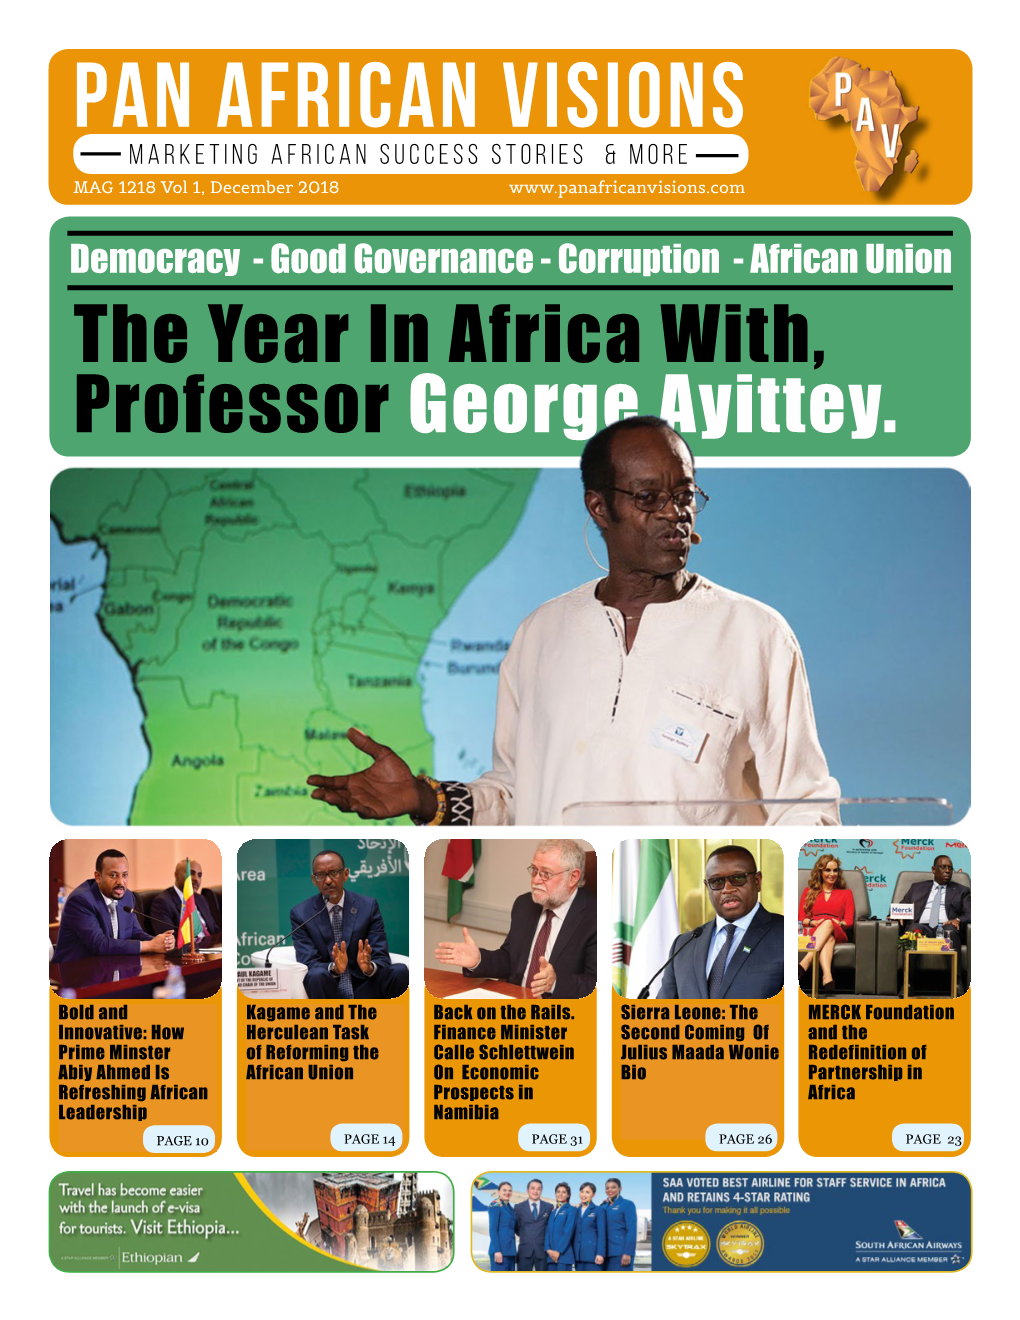 PAN AFRICAN VISIONS MARKETING AFRICAN SUCCESS STORIES & MORE MAG 1218 Vol 1, December 2018